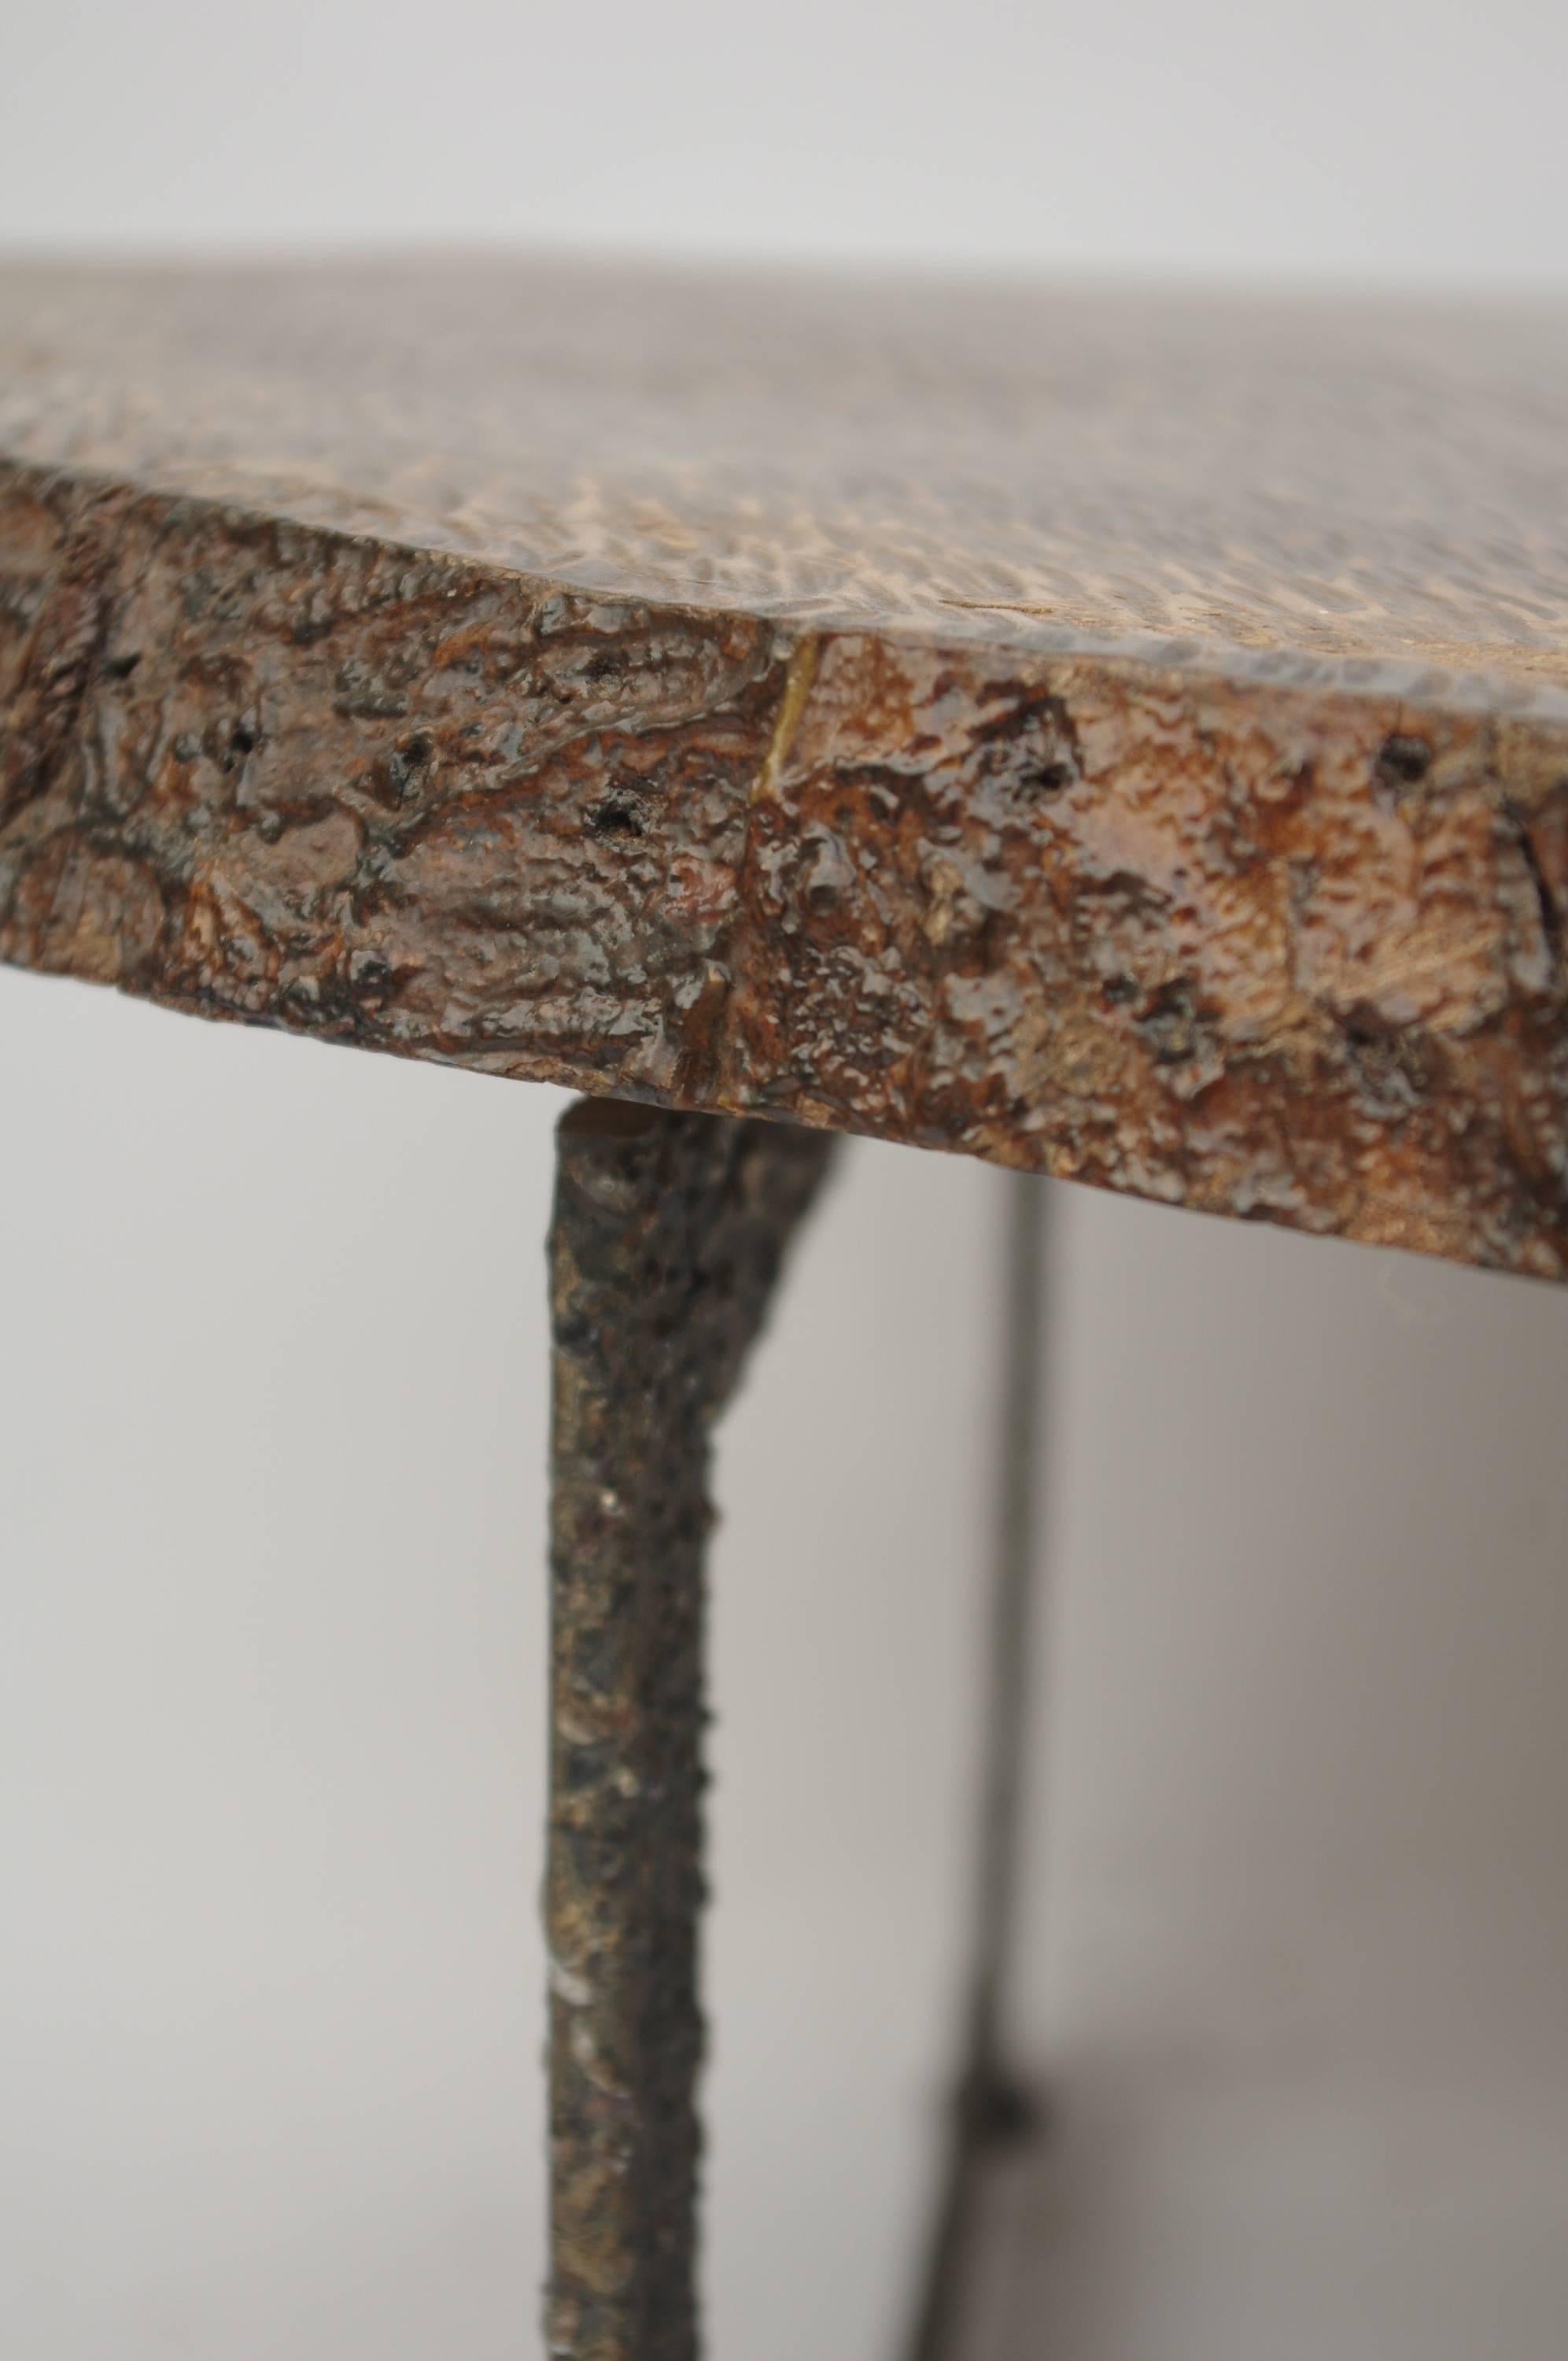 Hammered wood.
Table leg in metal.
Contemporary art by Thierry Jacques.